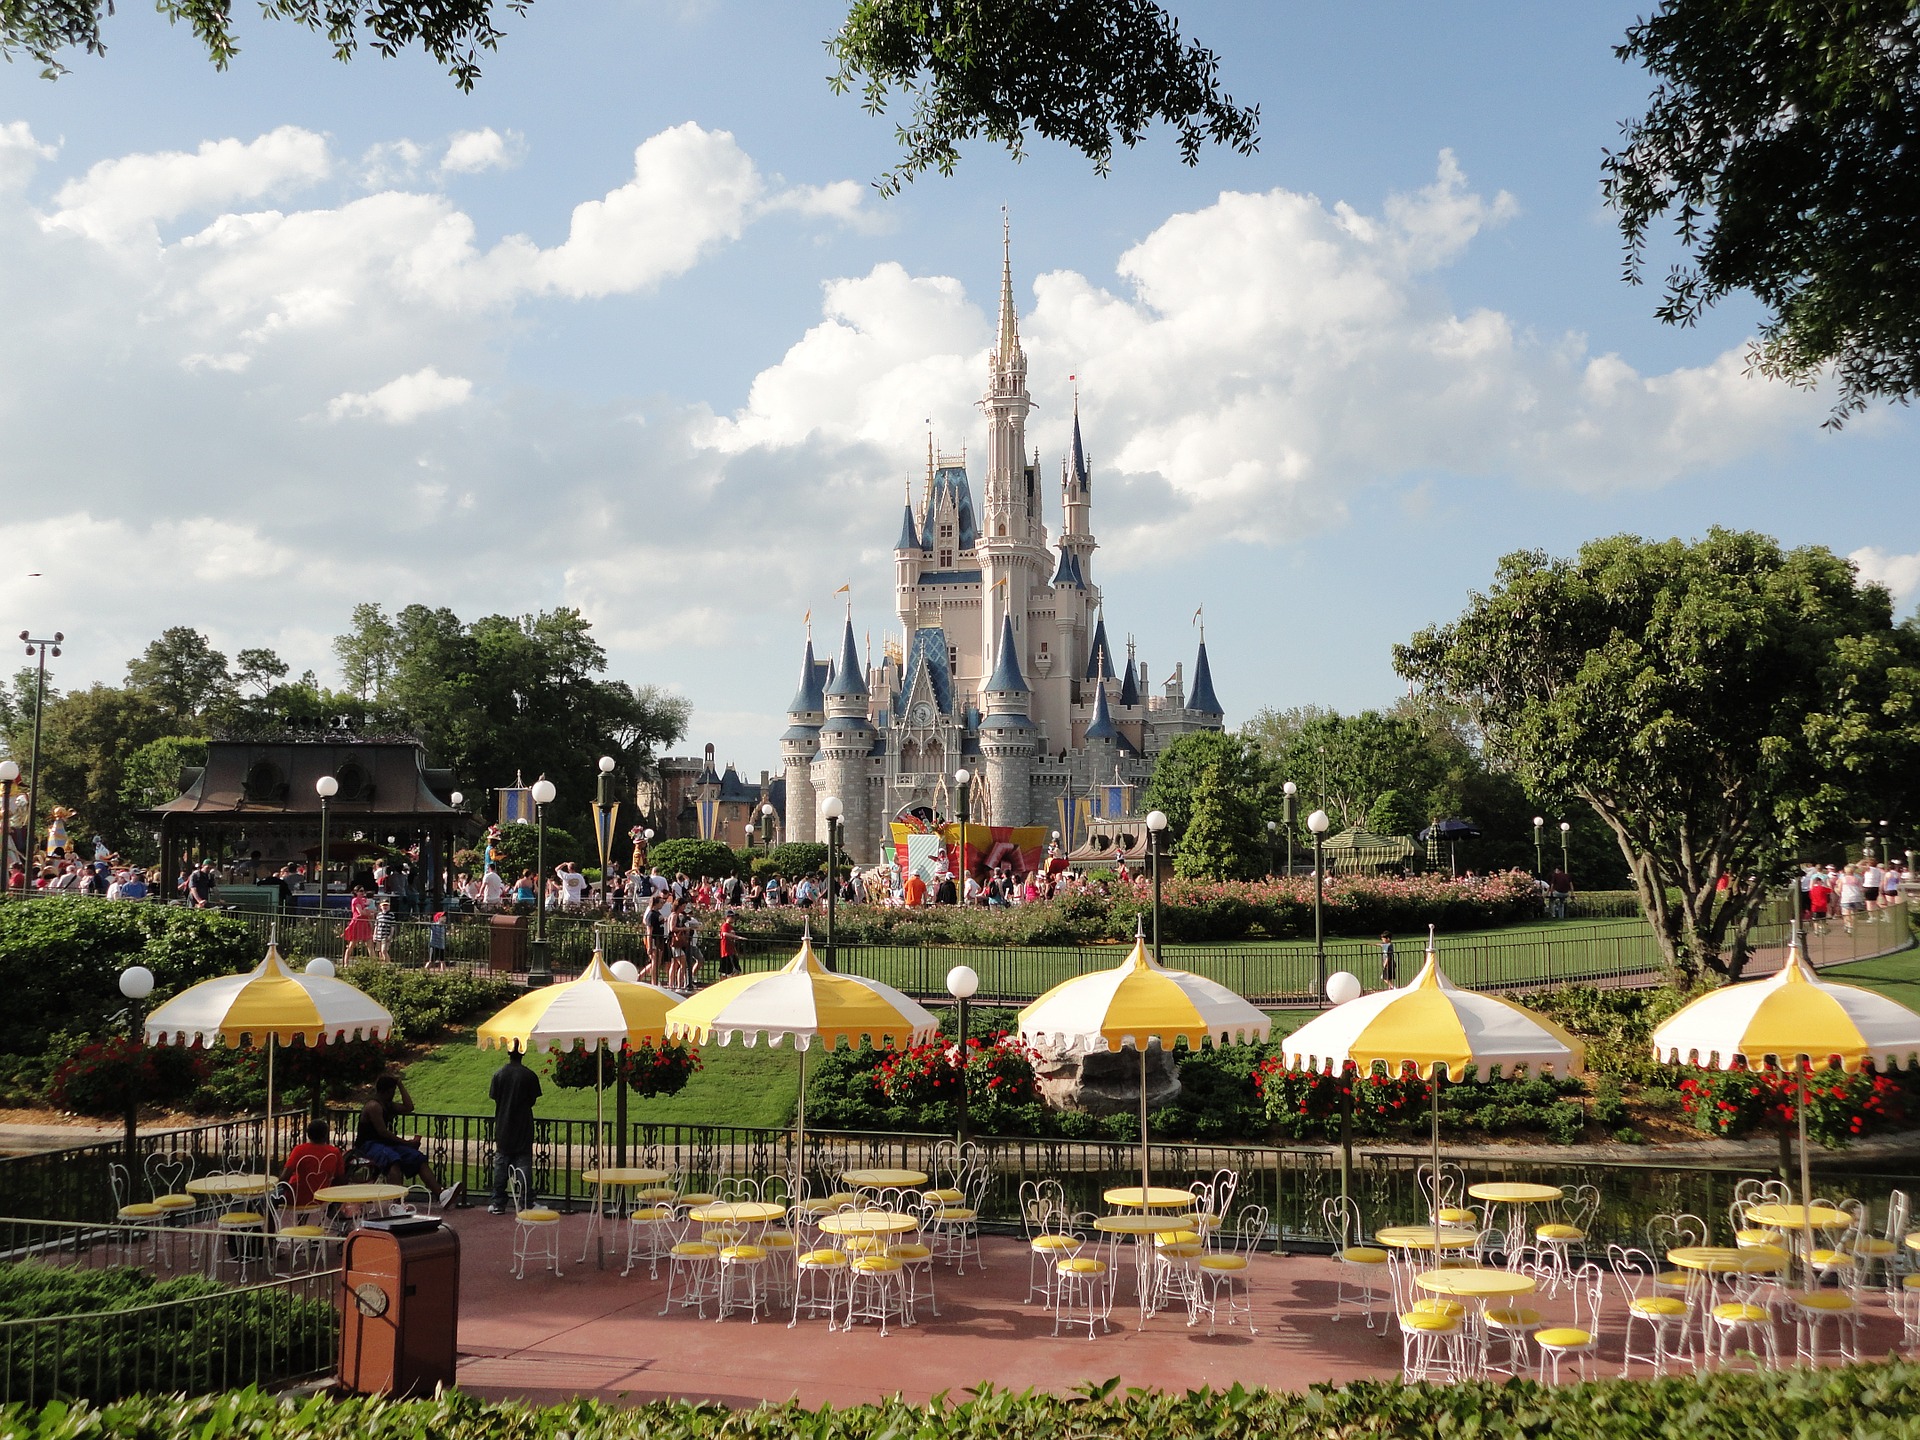 Disneyland and Disney World are two of the most magical places on earth! Find out how both compare and what makes each park unique.